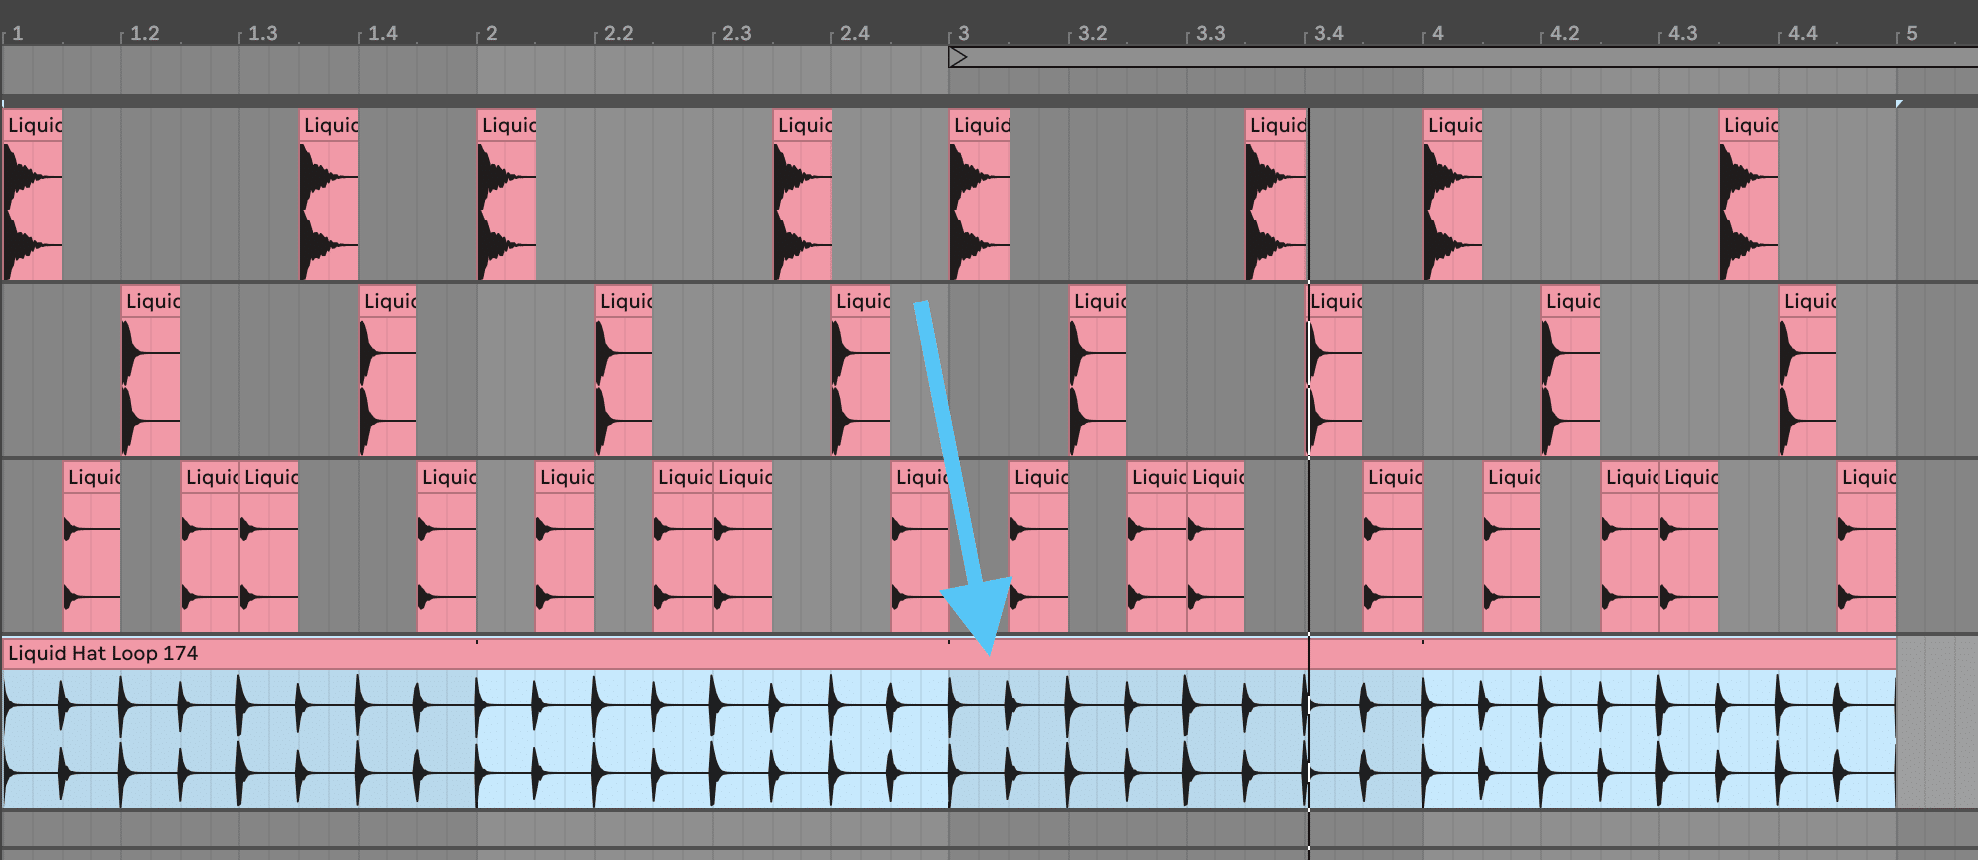 Adding some top loops